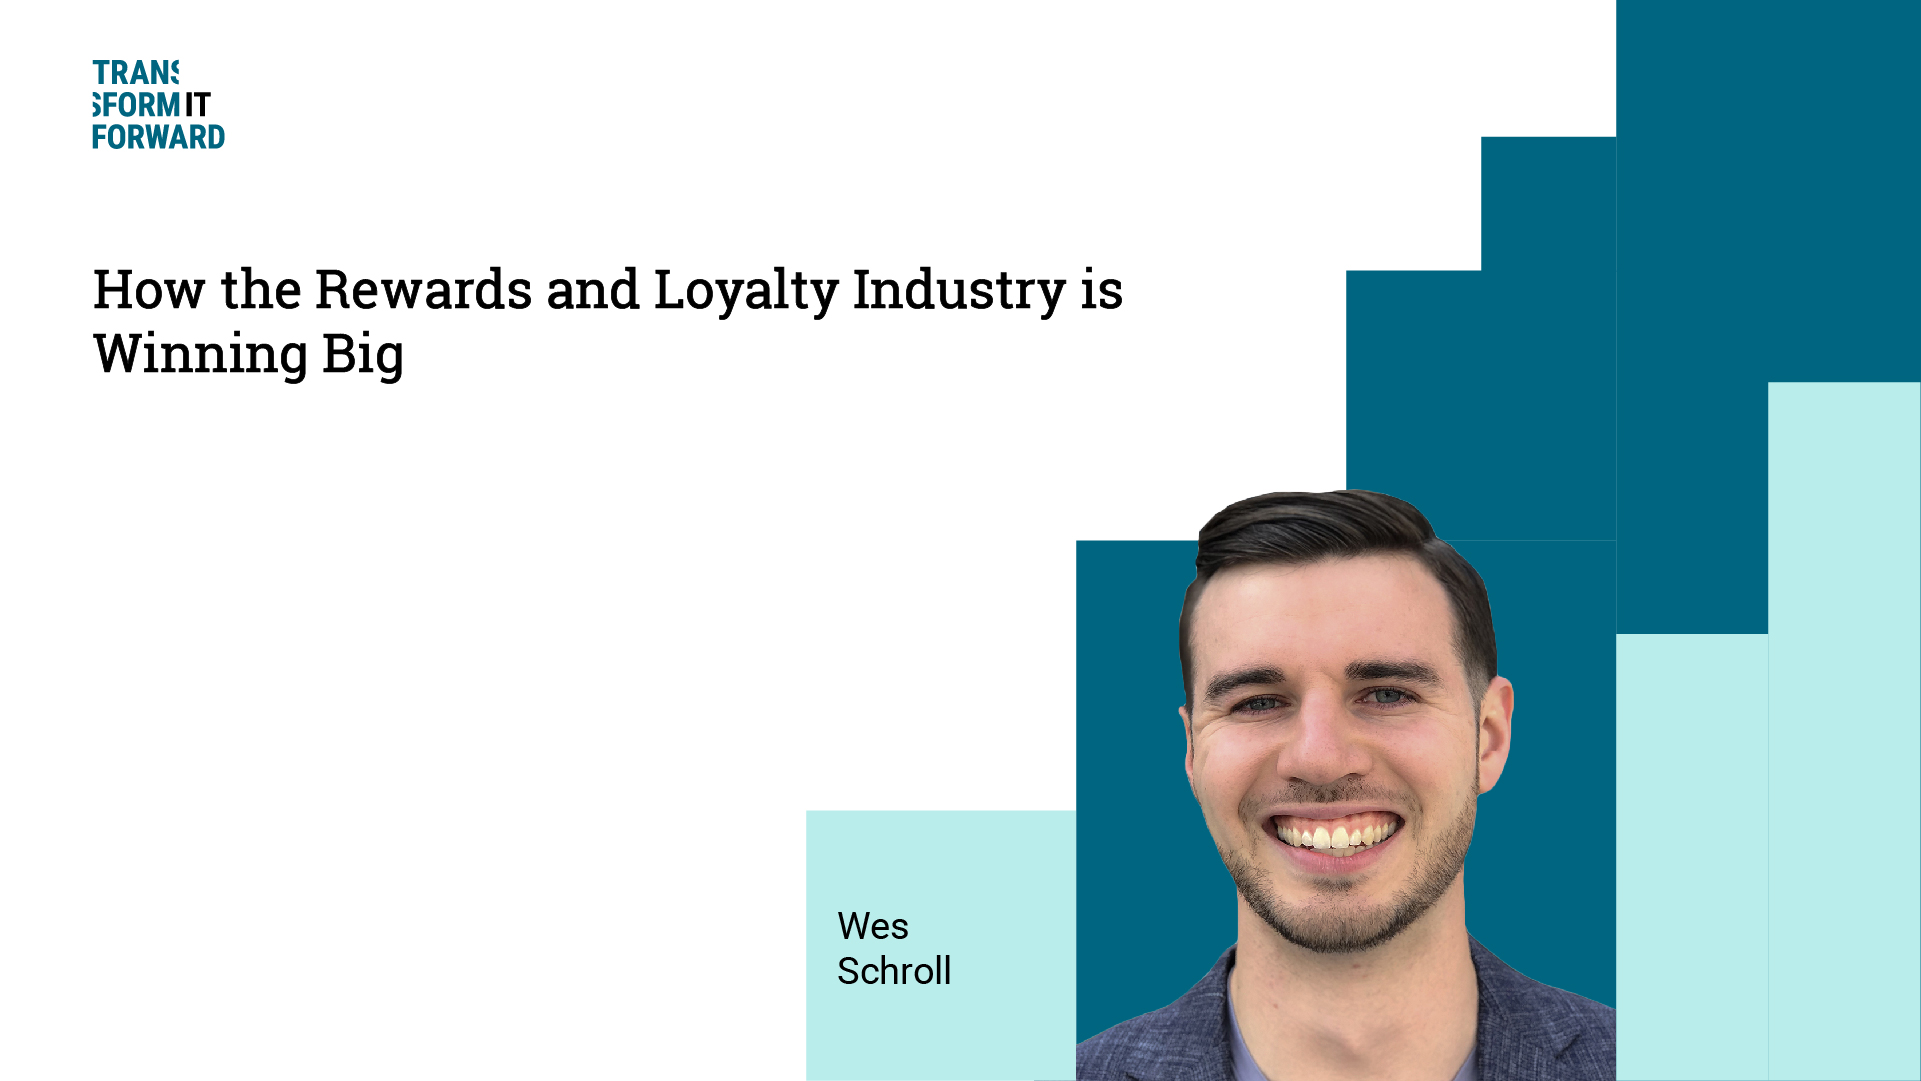 How the rewards and loyalty industry is winning big